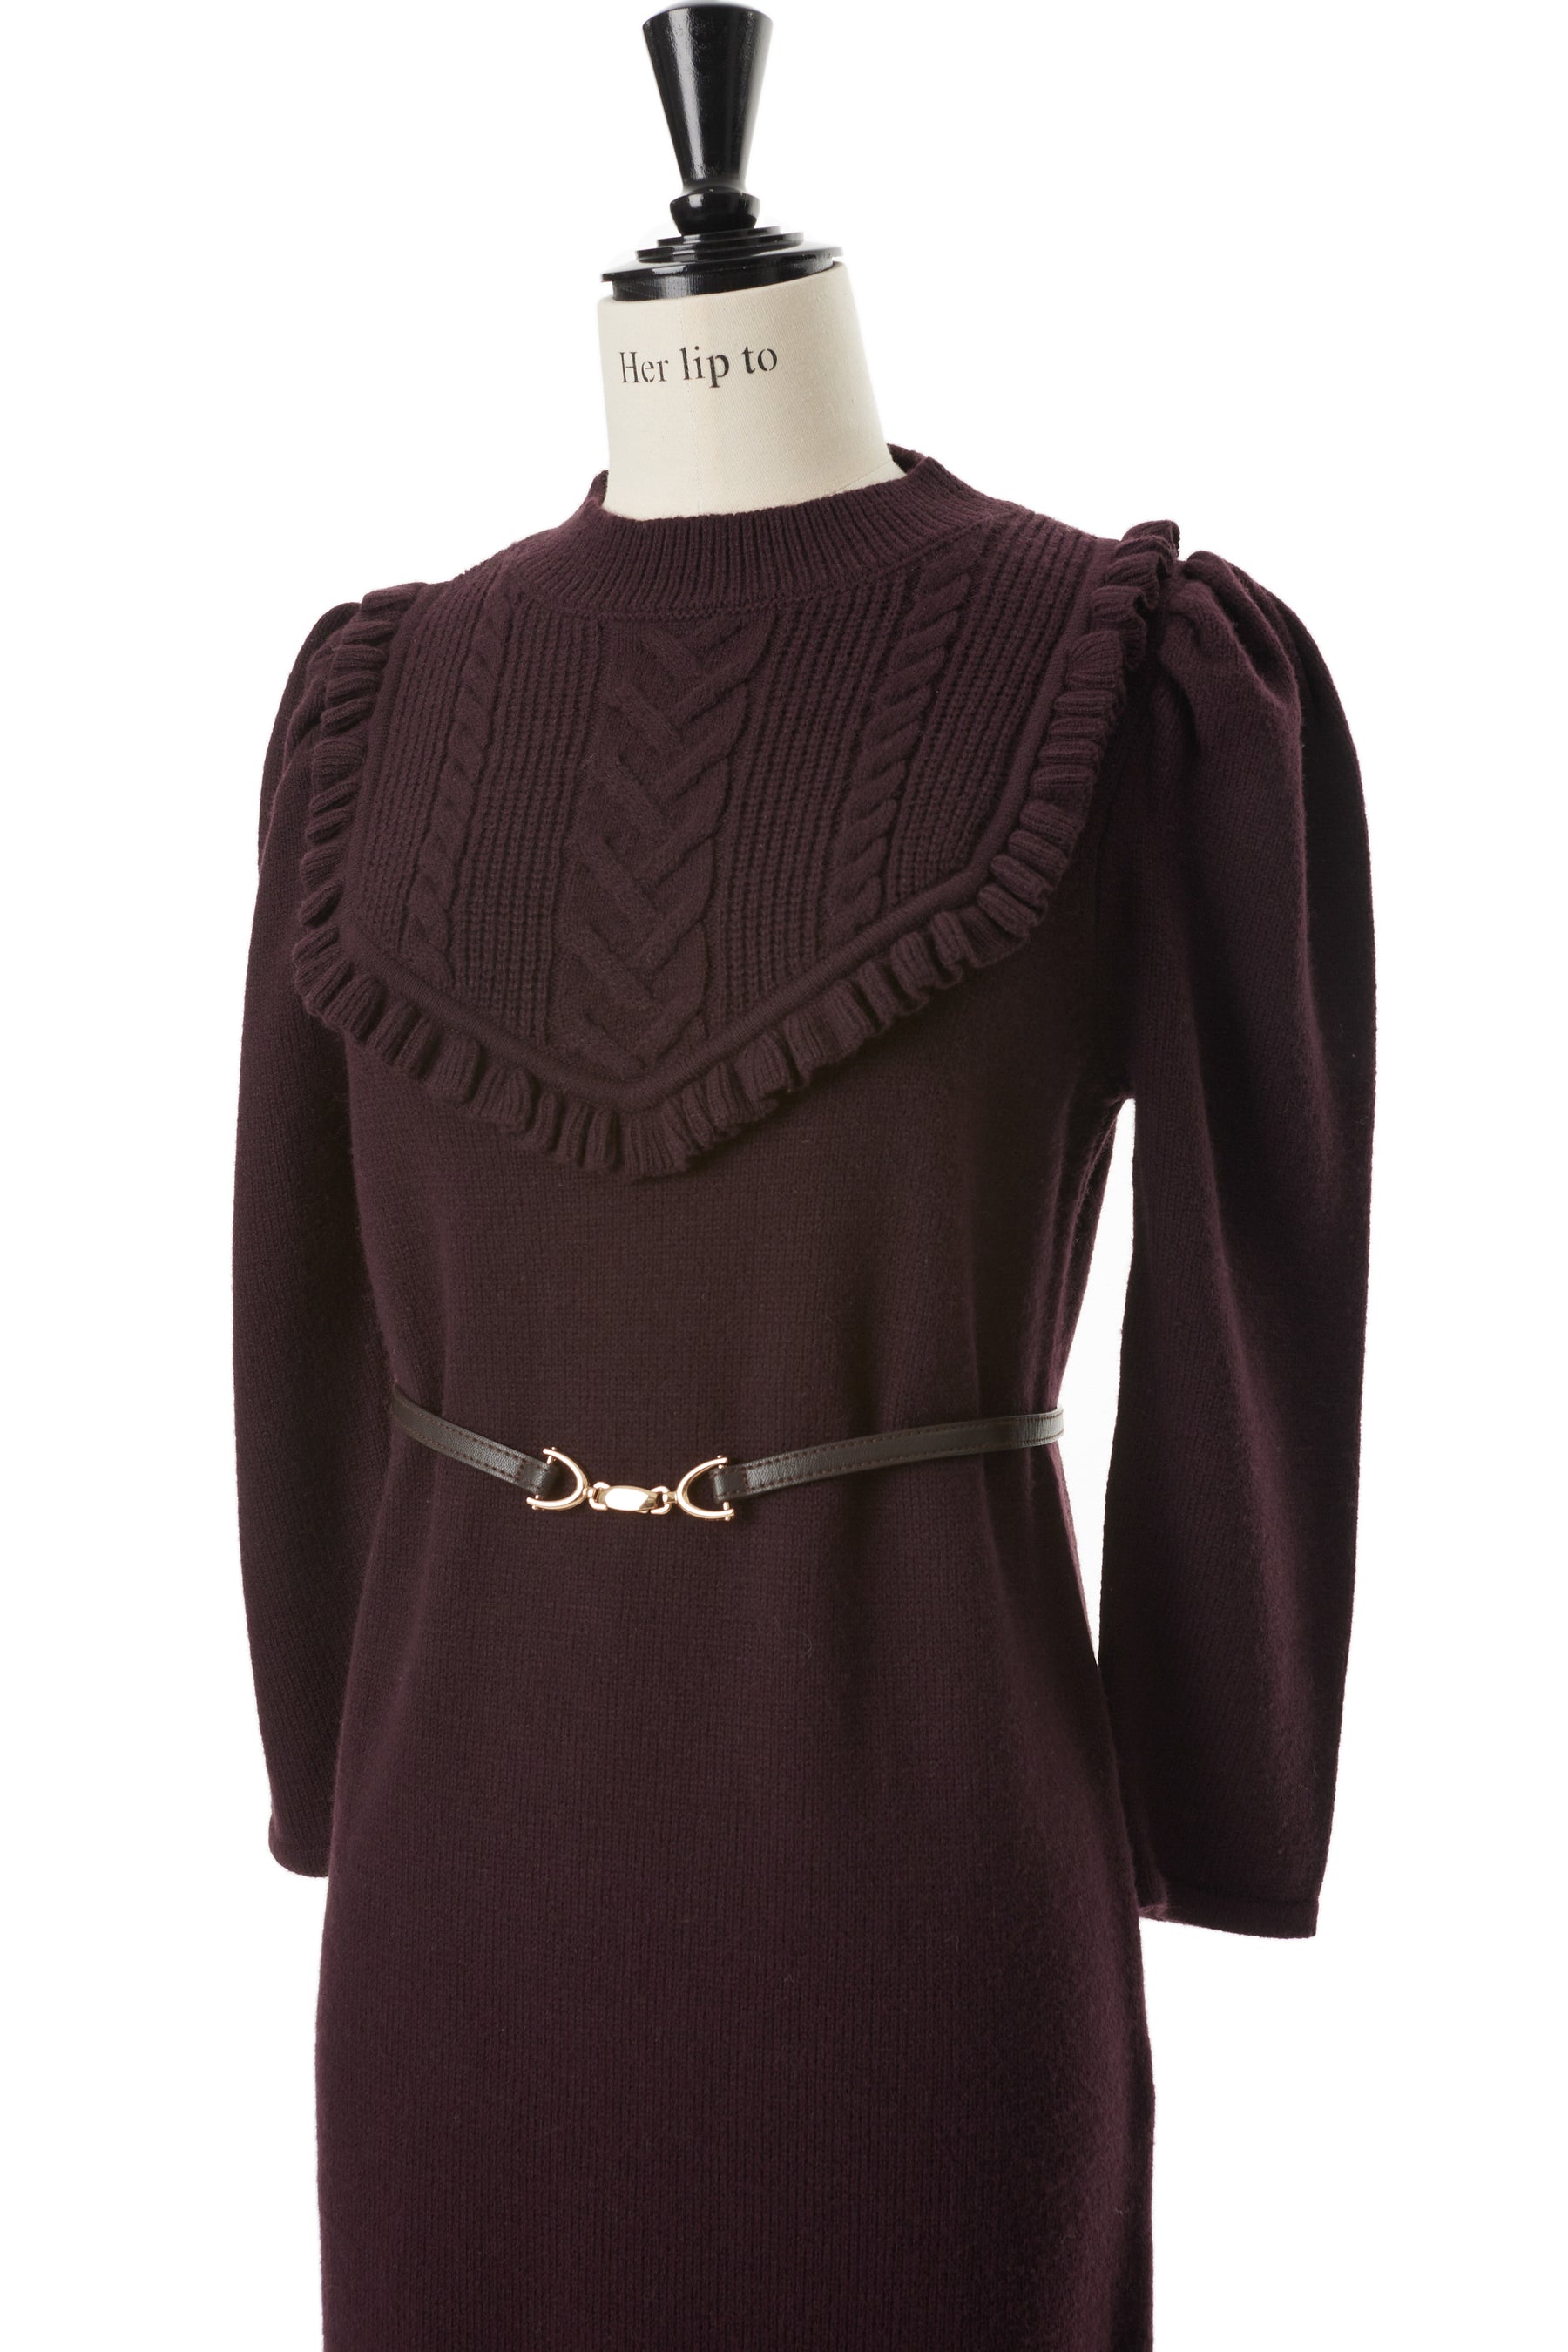 Herlipto Belted Ruffle Cable-Knit Dress | www.darquer.fr